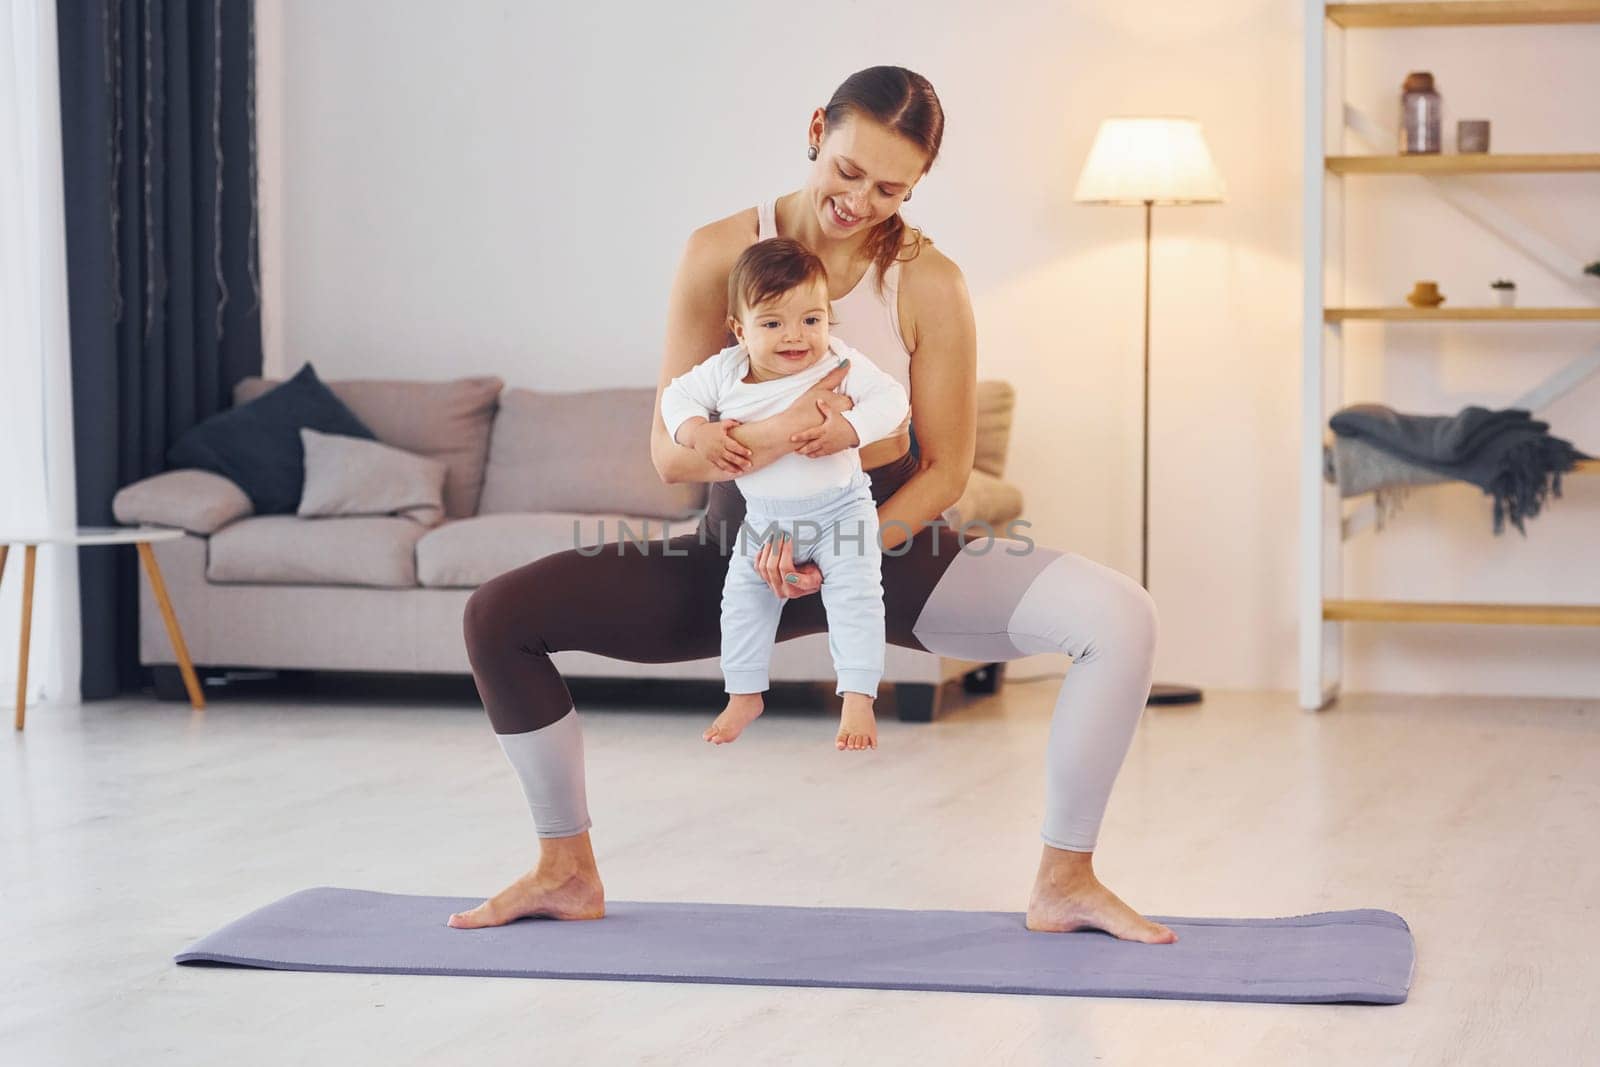 Teaching fitness. Mother with her little daughter is at home together by Standret